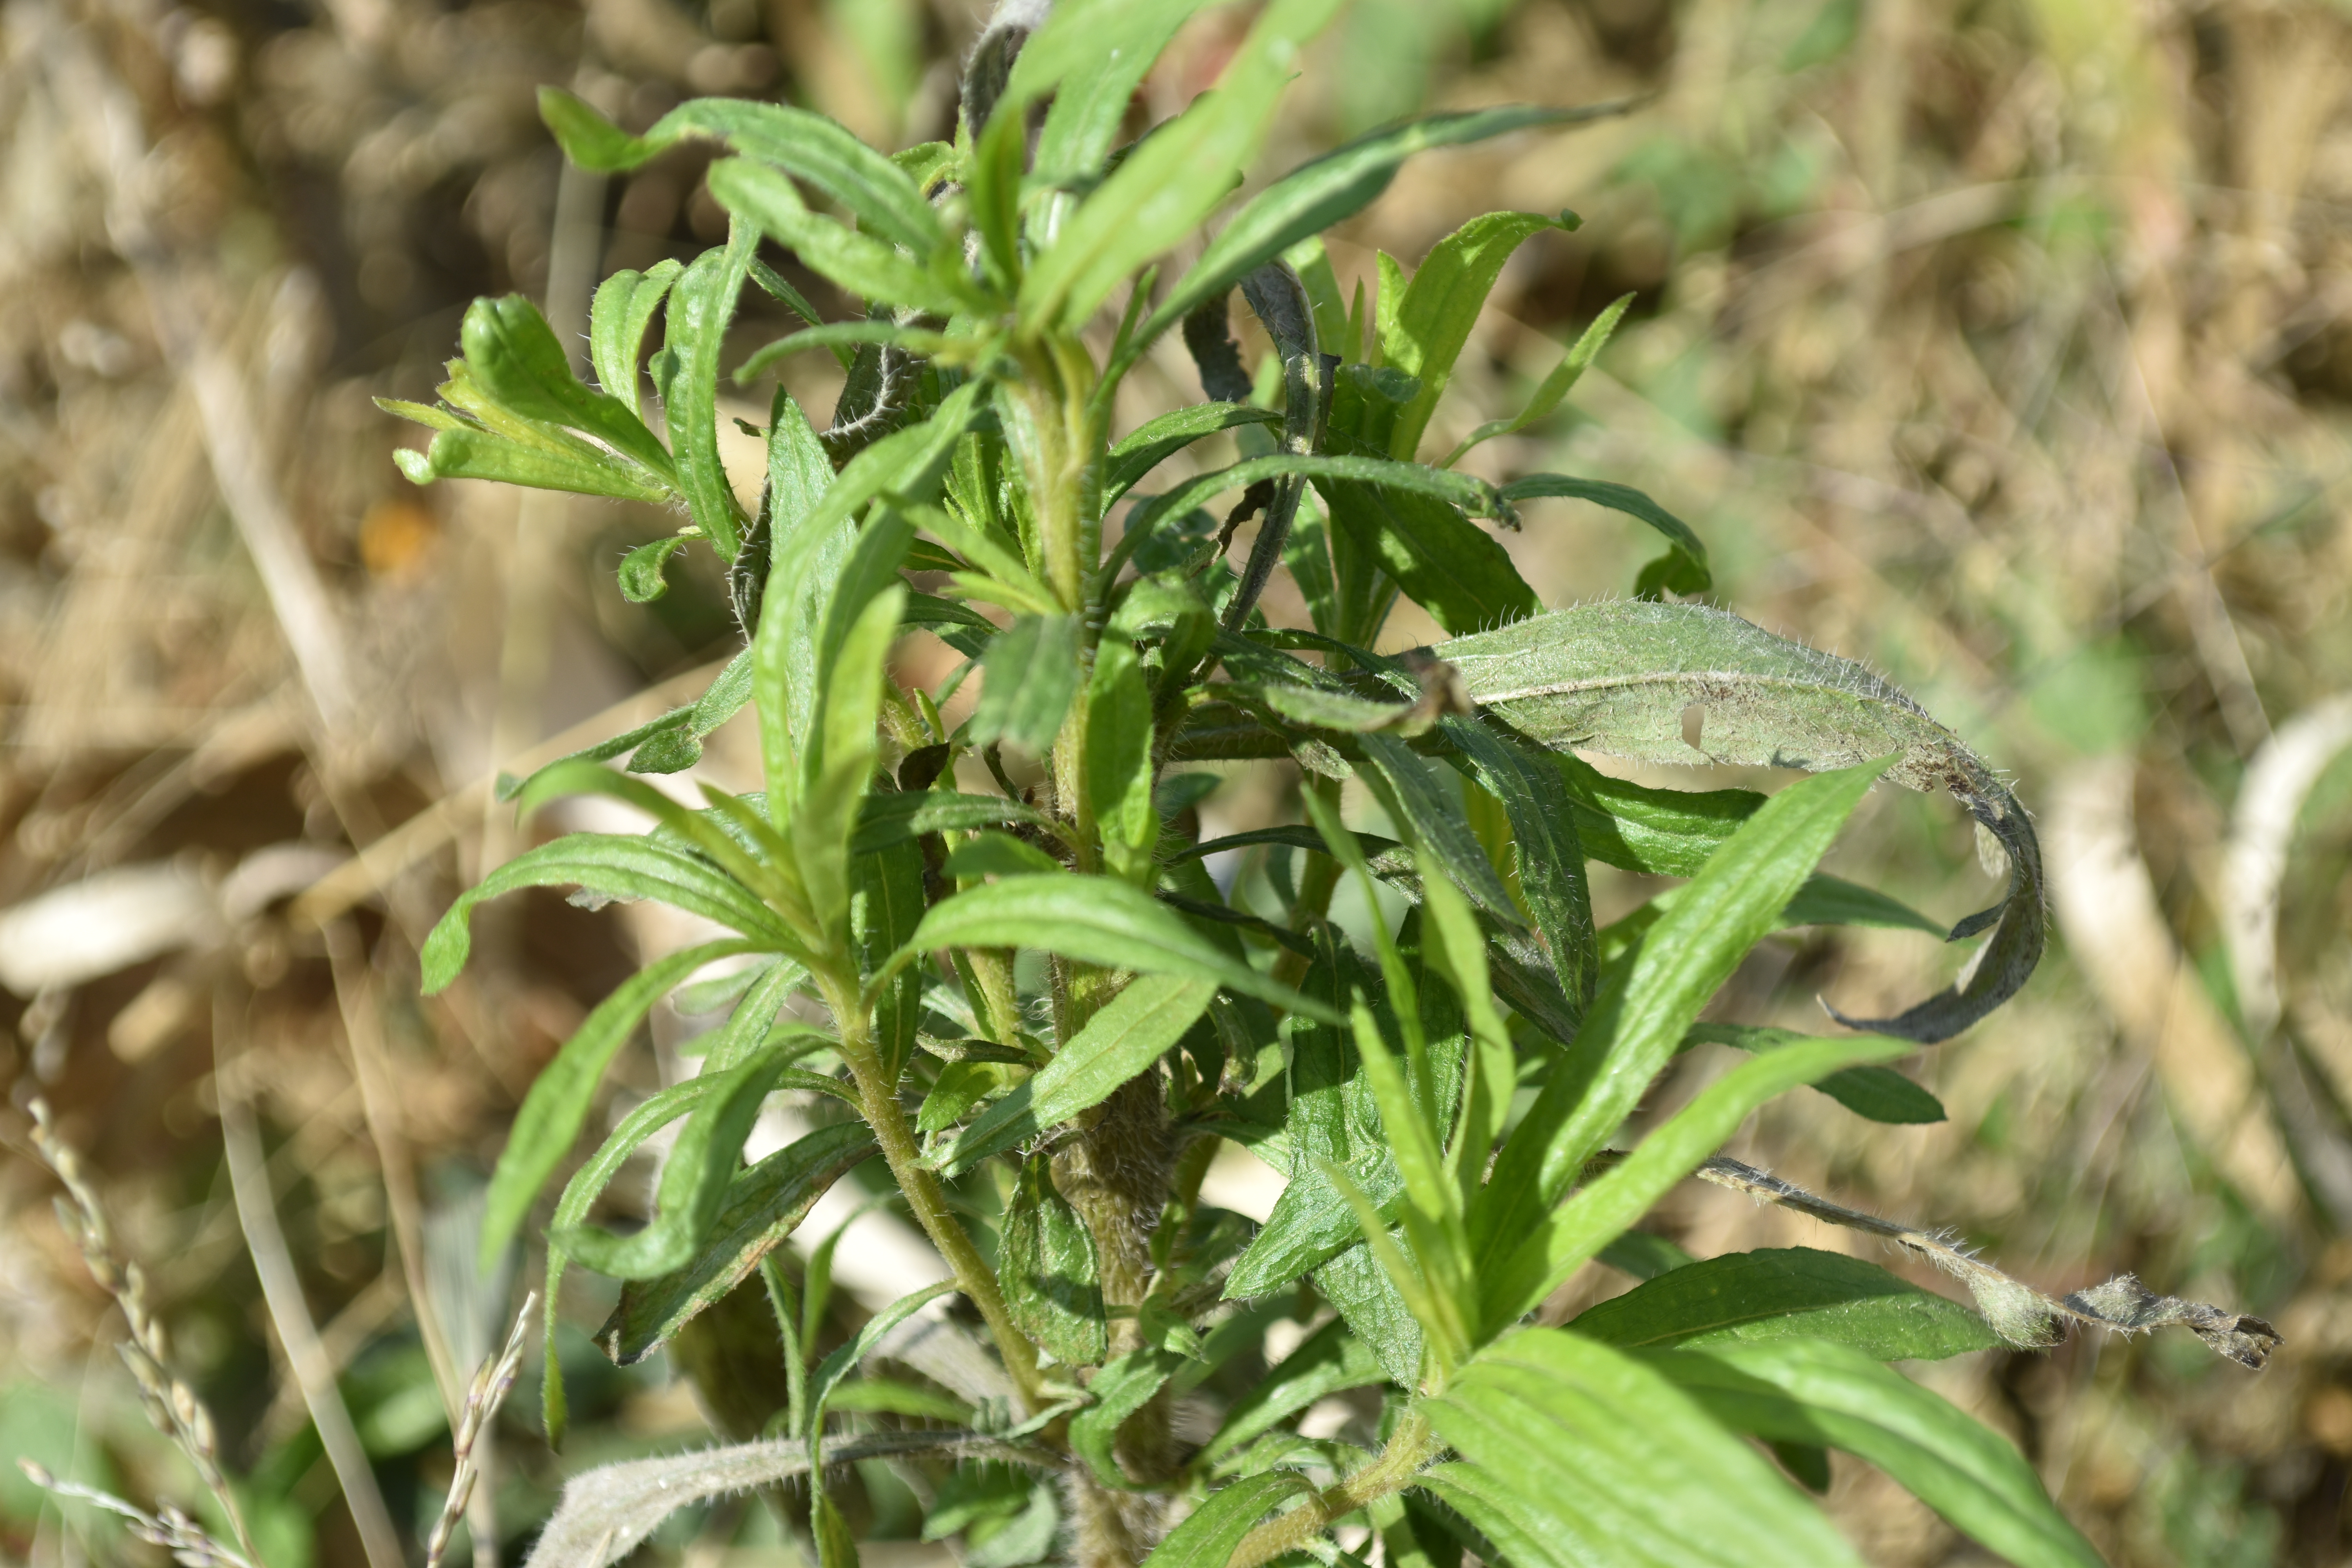 An agronomic photo showing marestail in a field.